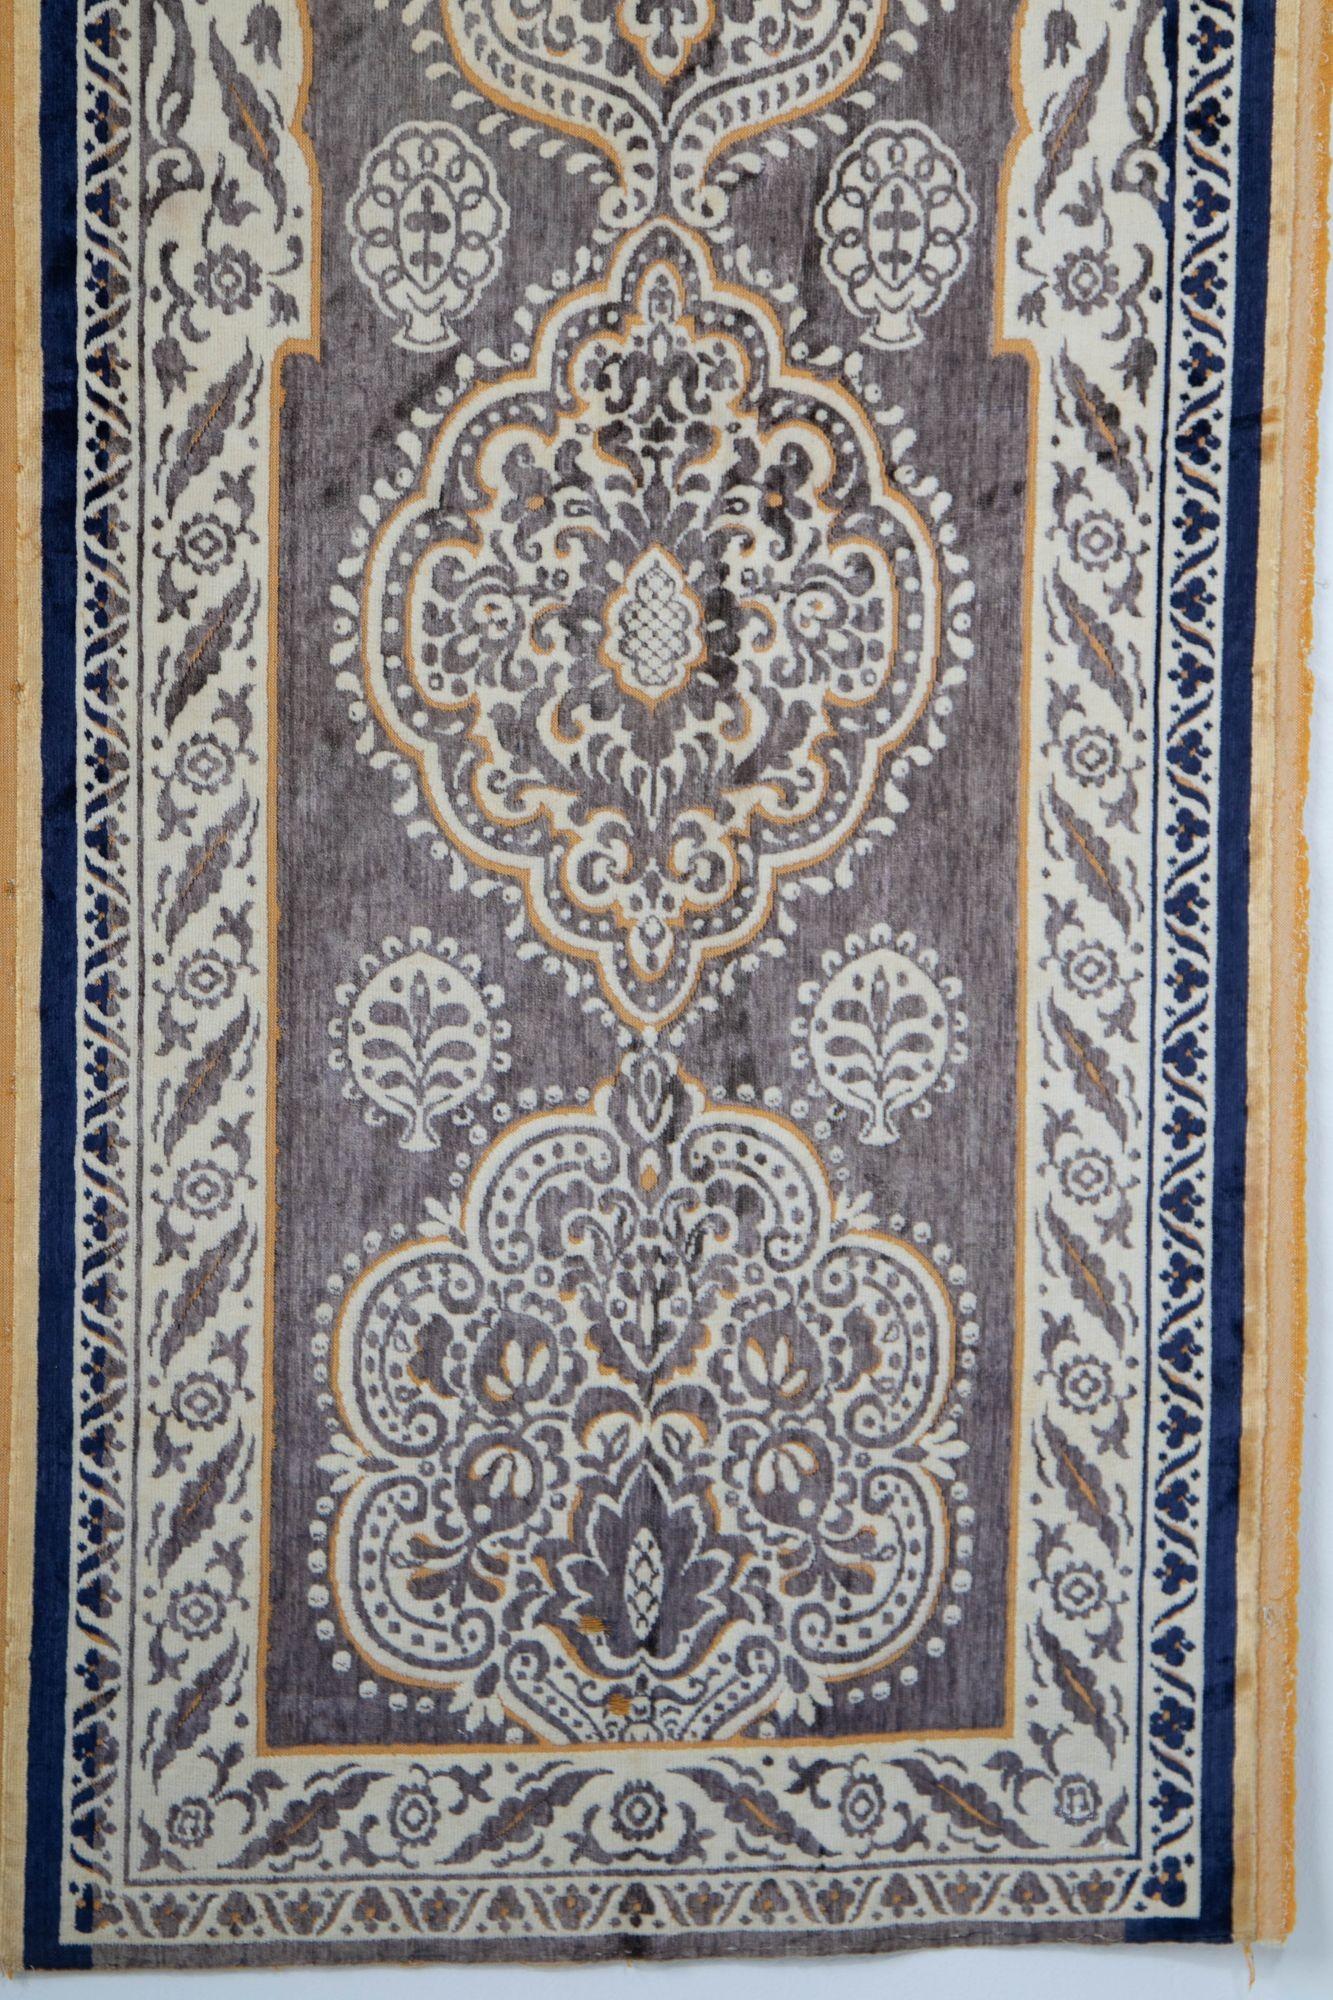 Antique Moroccan Moorish Silk Textile Tapestry Wall Hanging Hiti 19th C. For Sale 12